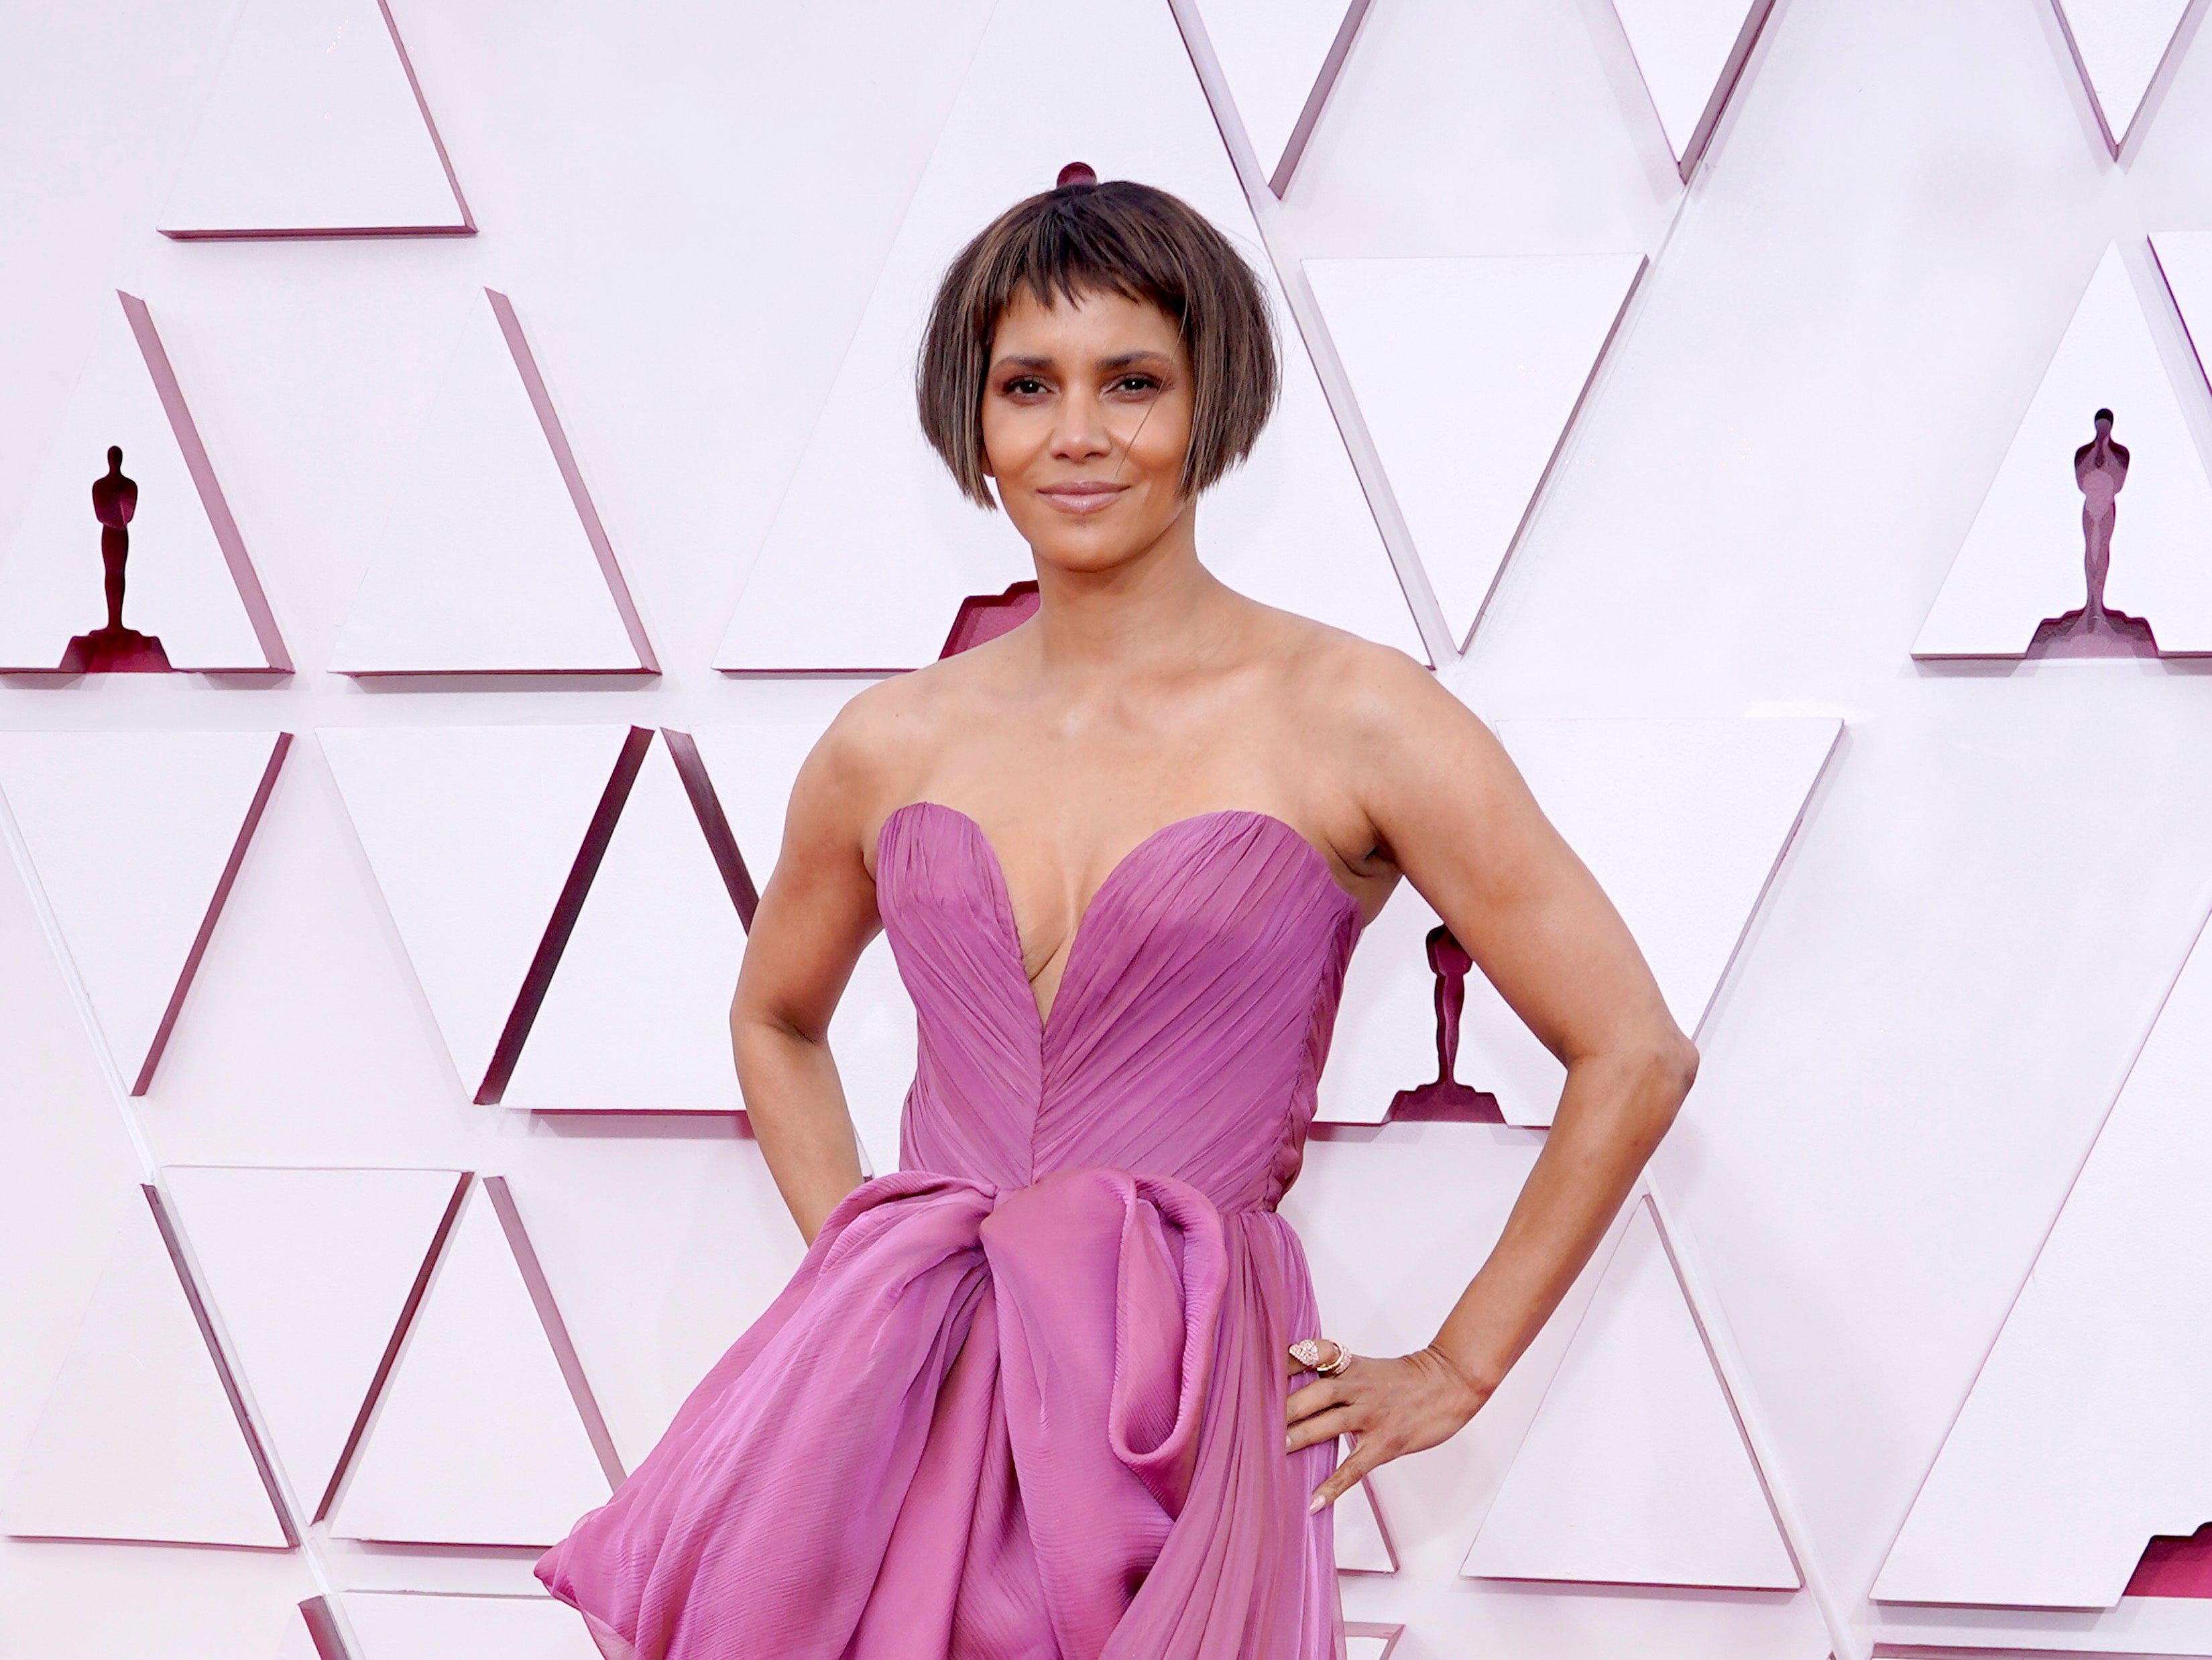 Halle Berry speaks about preconceived notions about her beauty